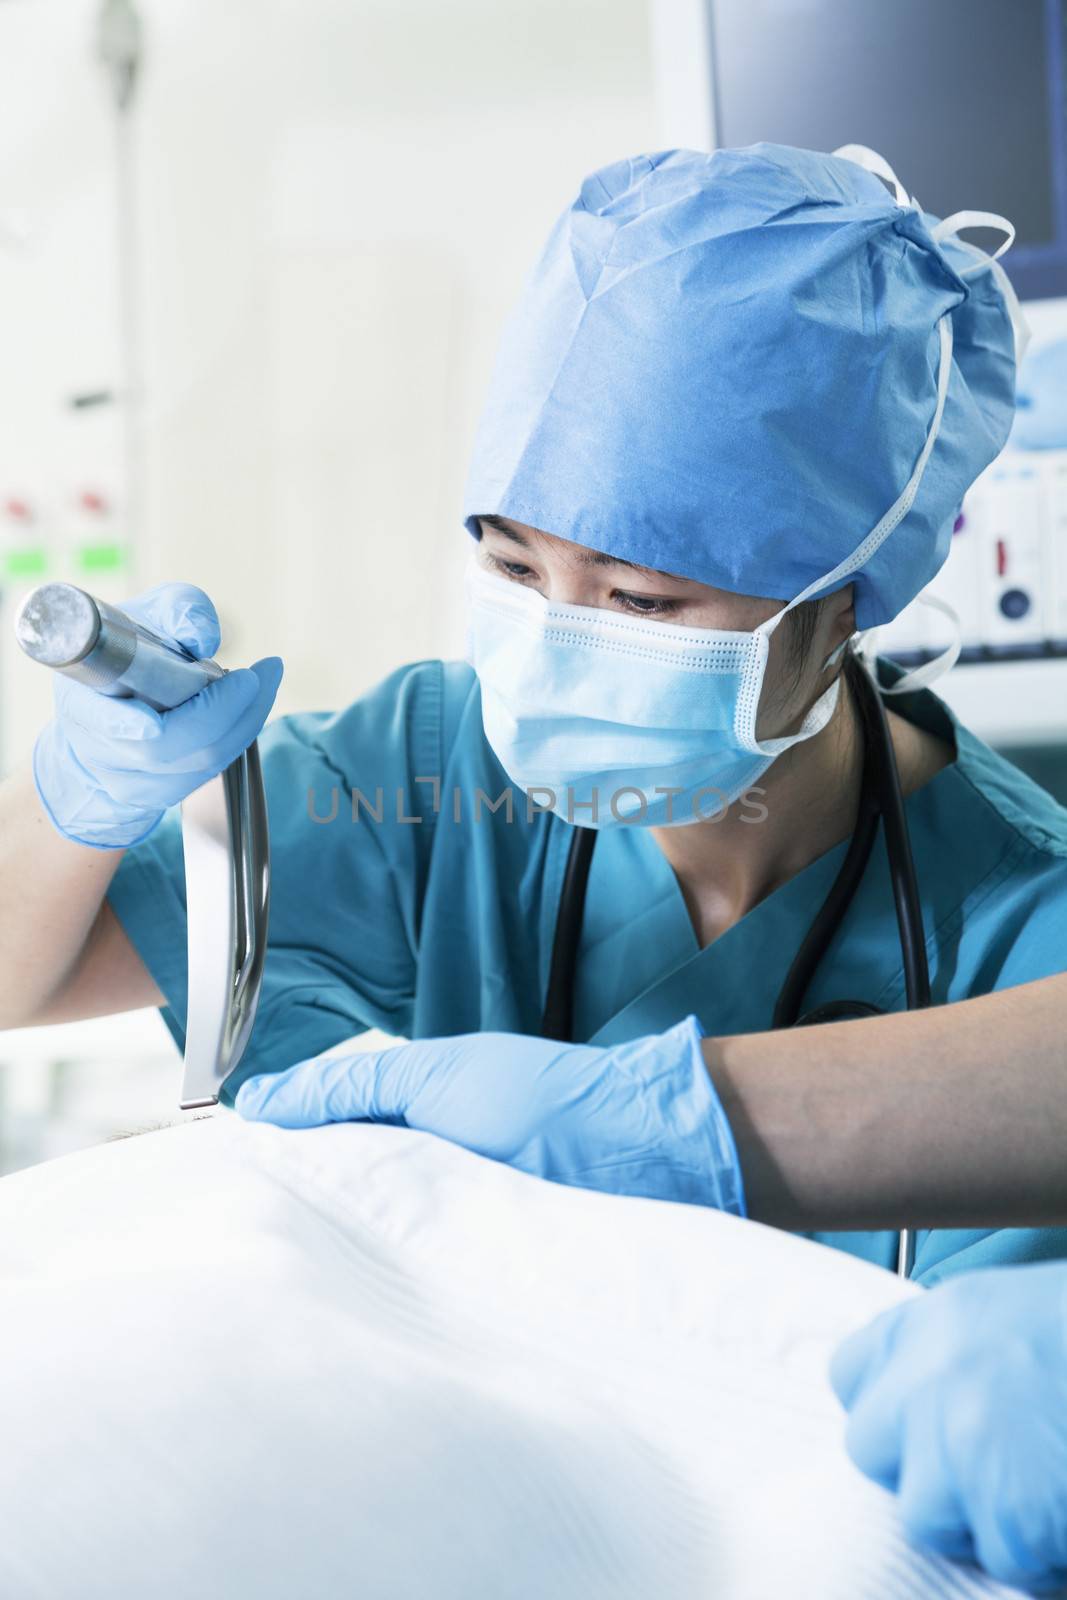 Surgeon looking down and holding surgical equipment in the operating room, close-up